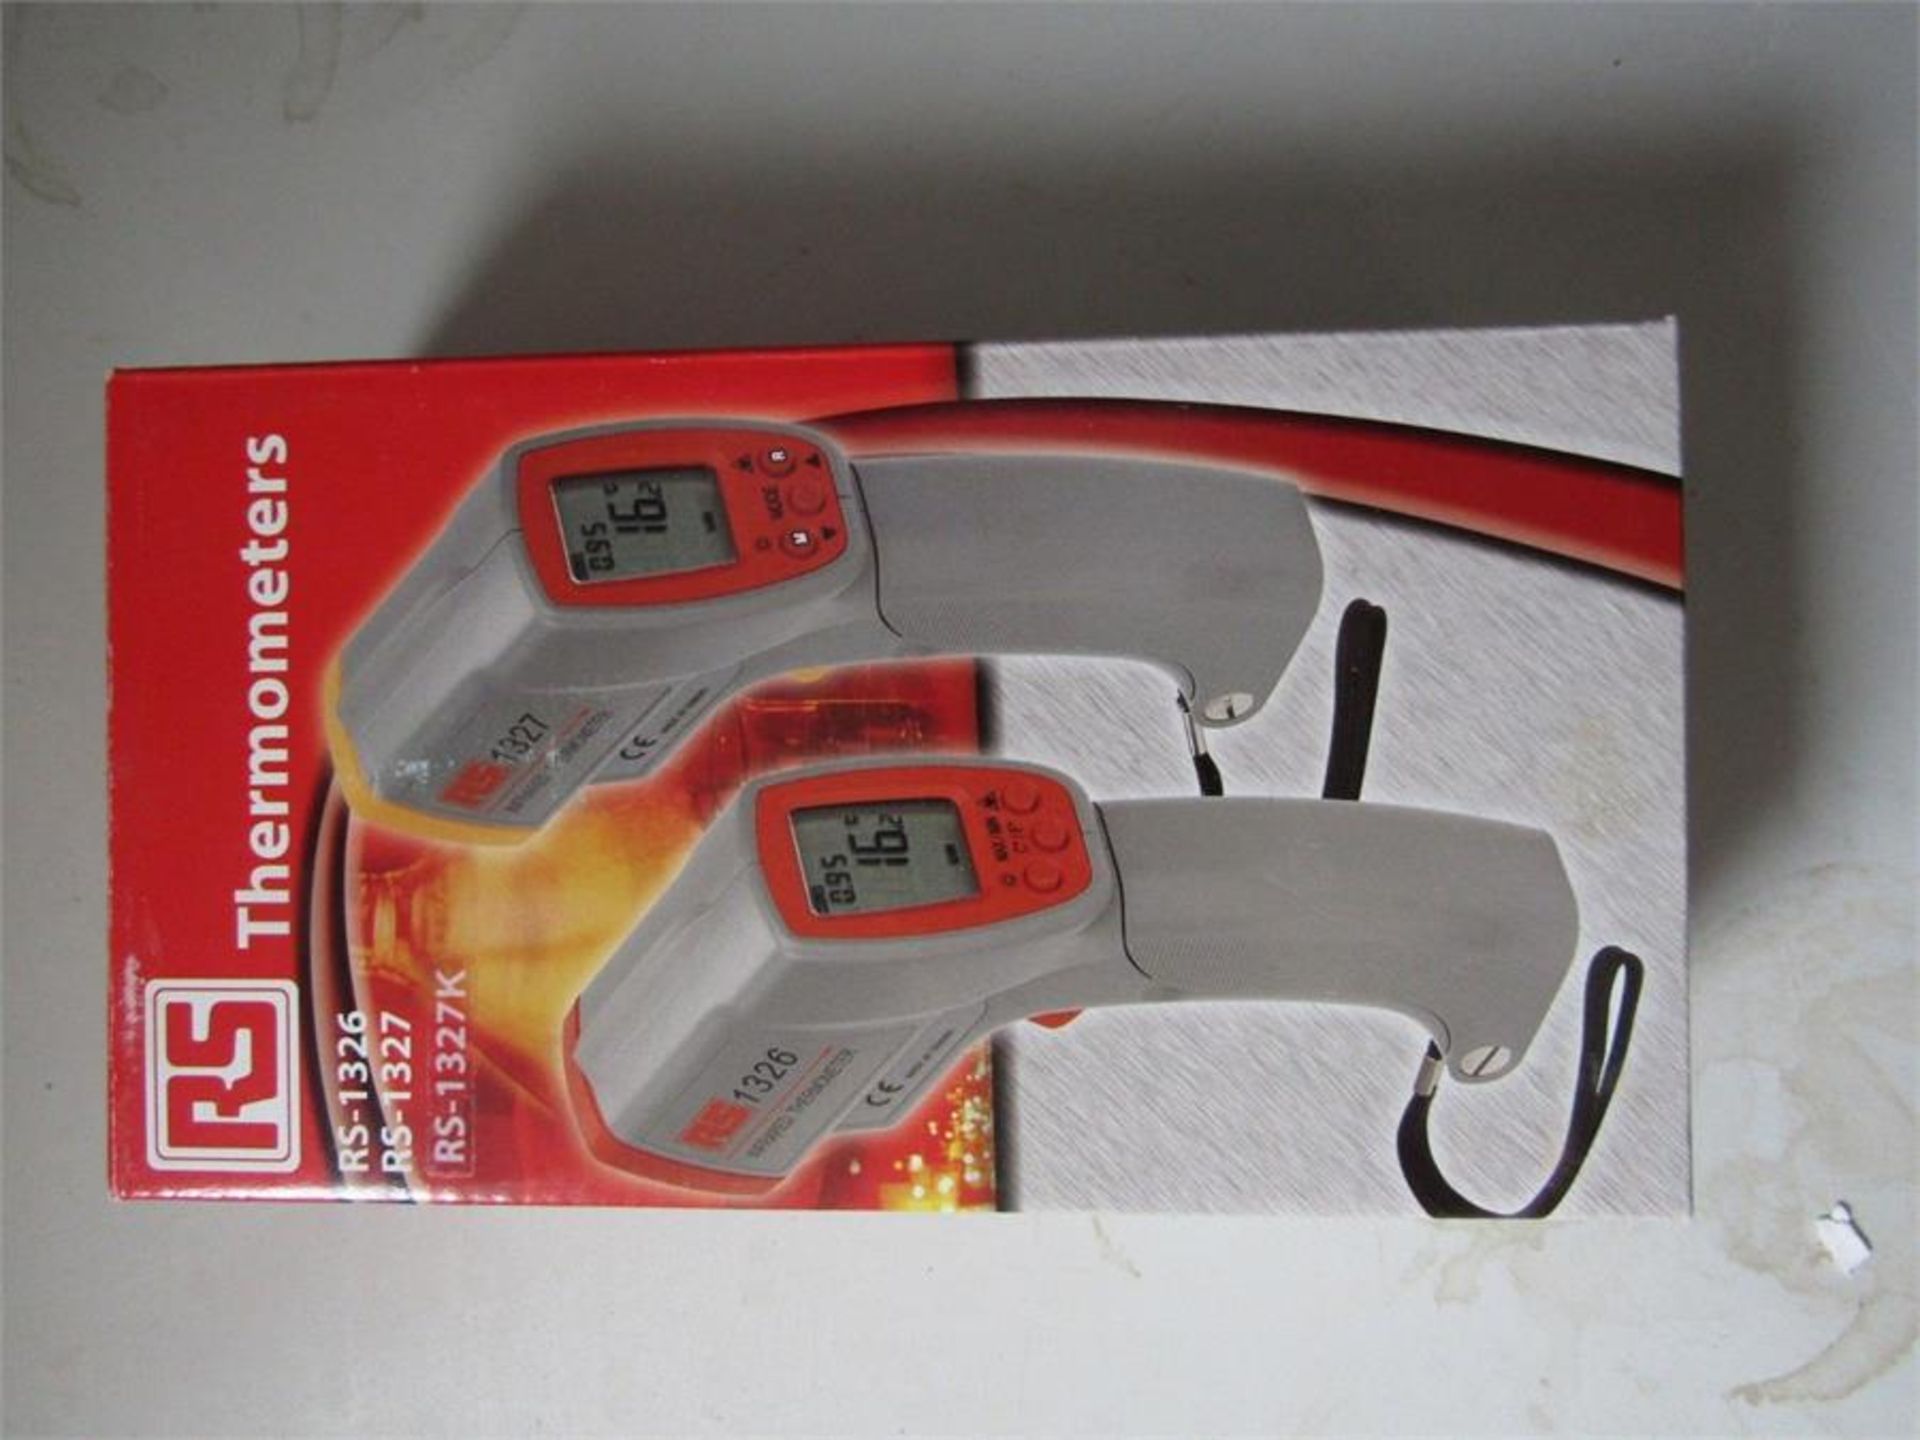 RS PRO RS-1327K IR Thermometer + socket for Type K thermocouple - T&M 411122 - Image 4 of 4